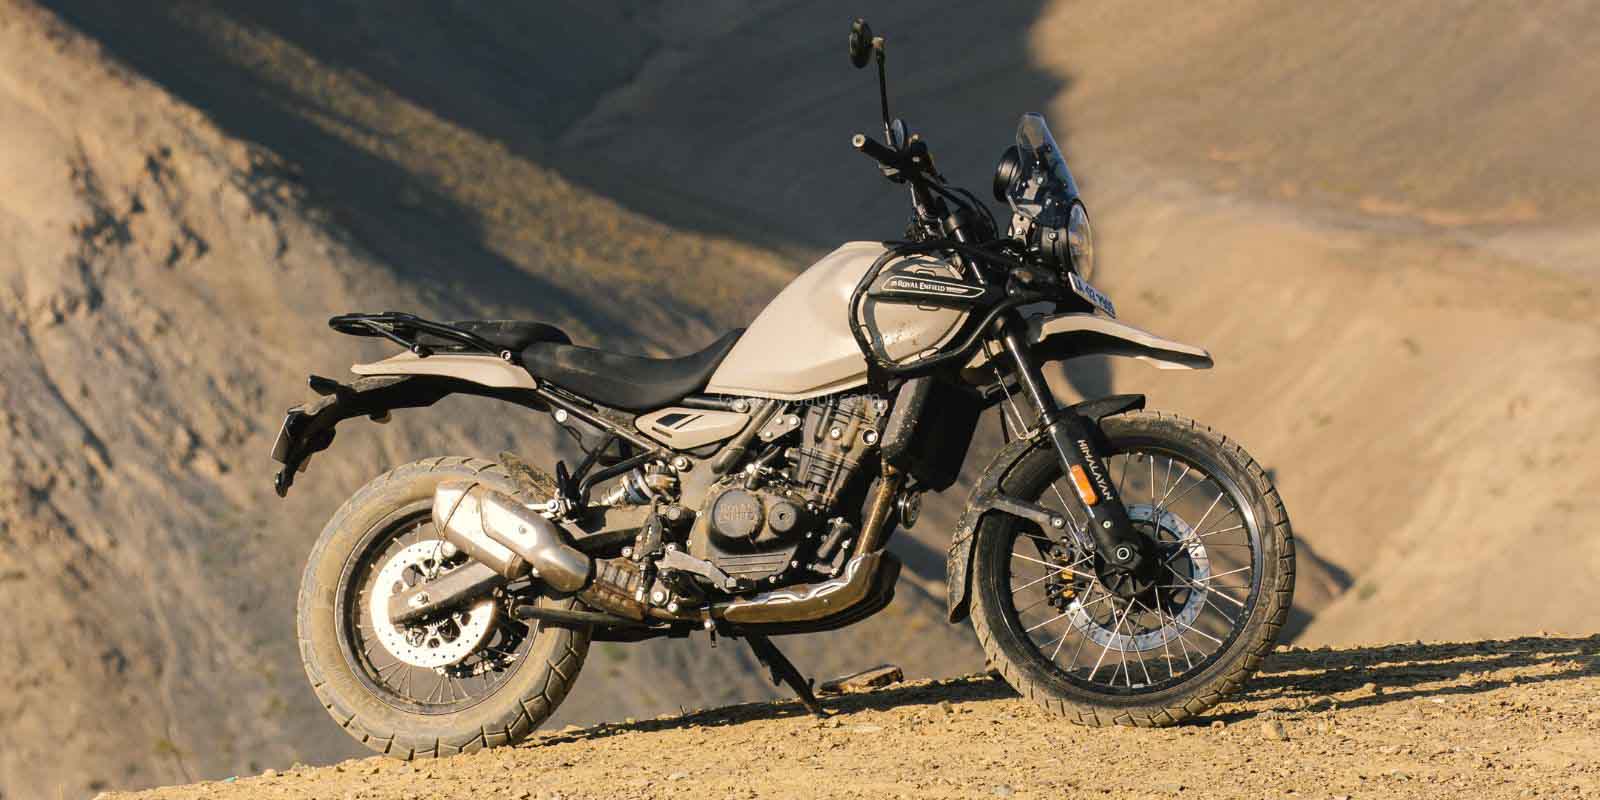 Royal Enfield Himalayan 450 Price Revealed: Royal Enfield All-New Himalayan  Launched, Priced From Rs 2.69 Lakh